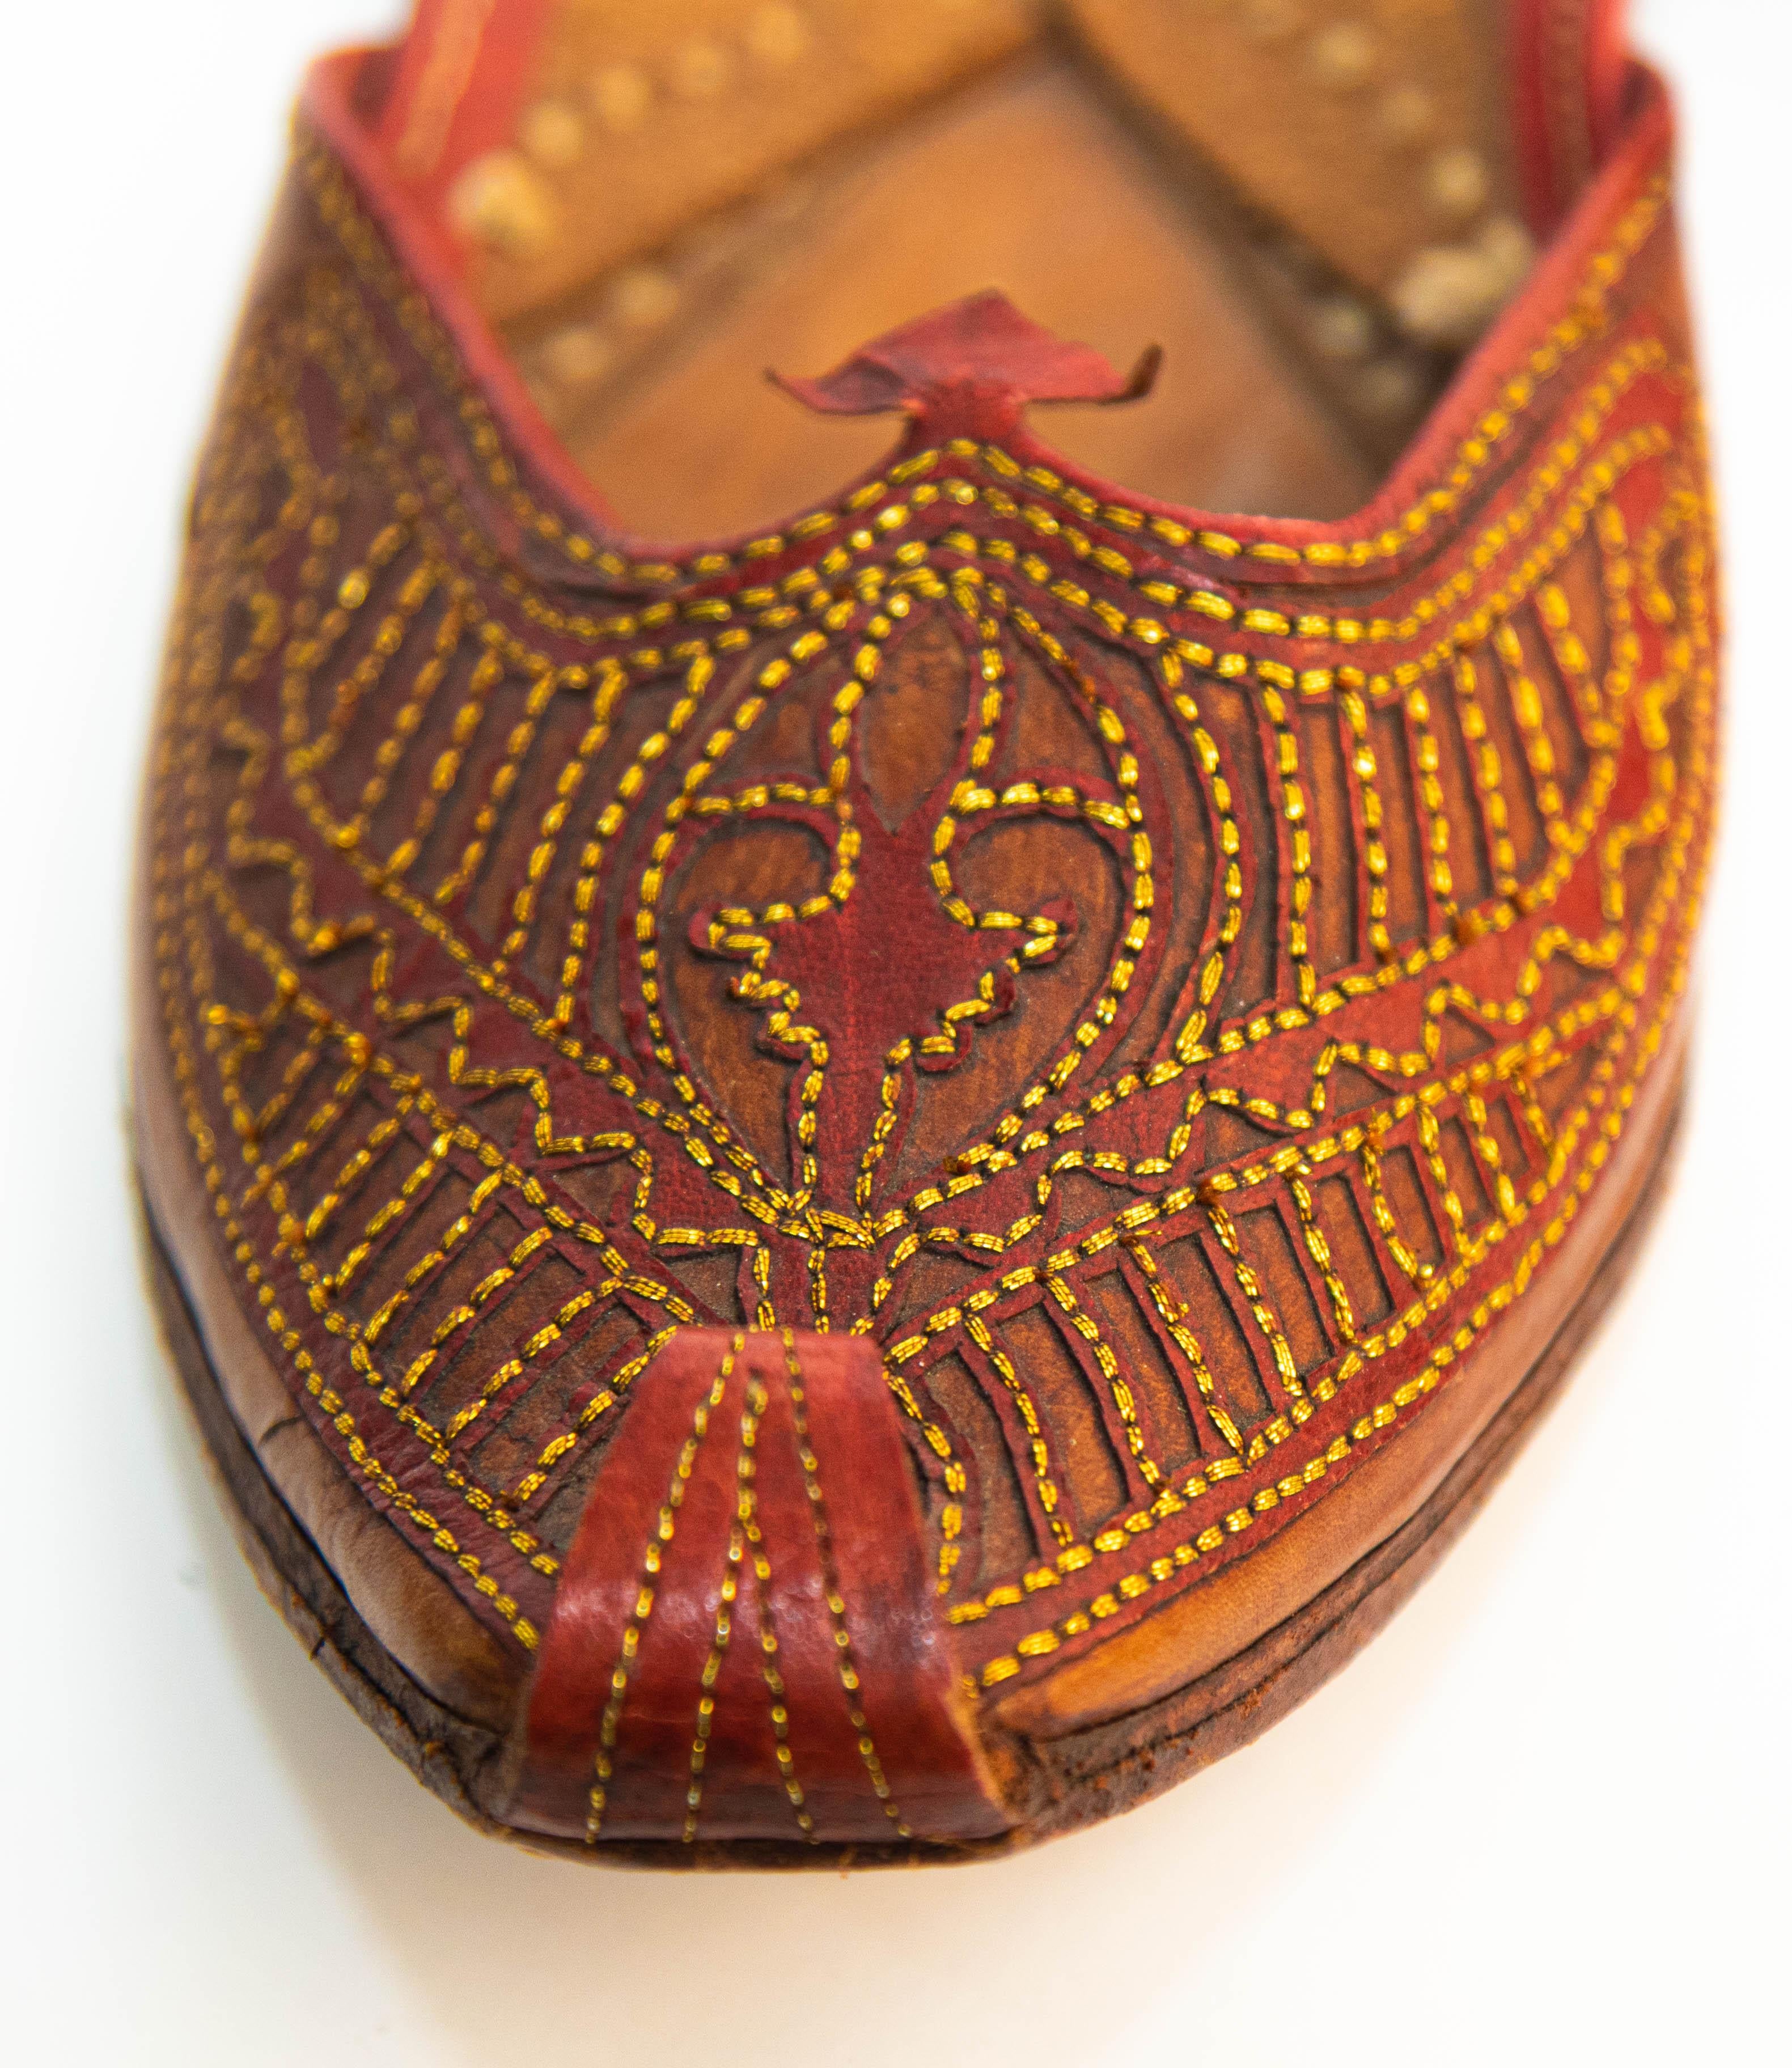 Islamic Vintage Arabian Mughal Leather Shoes with Gold Embroidered Curled Toe For Sale